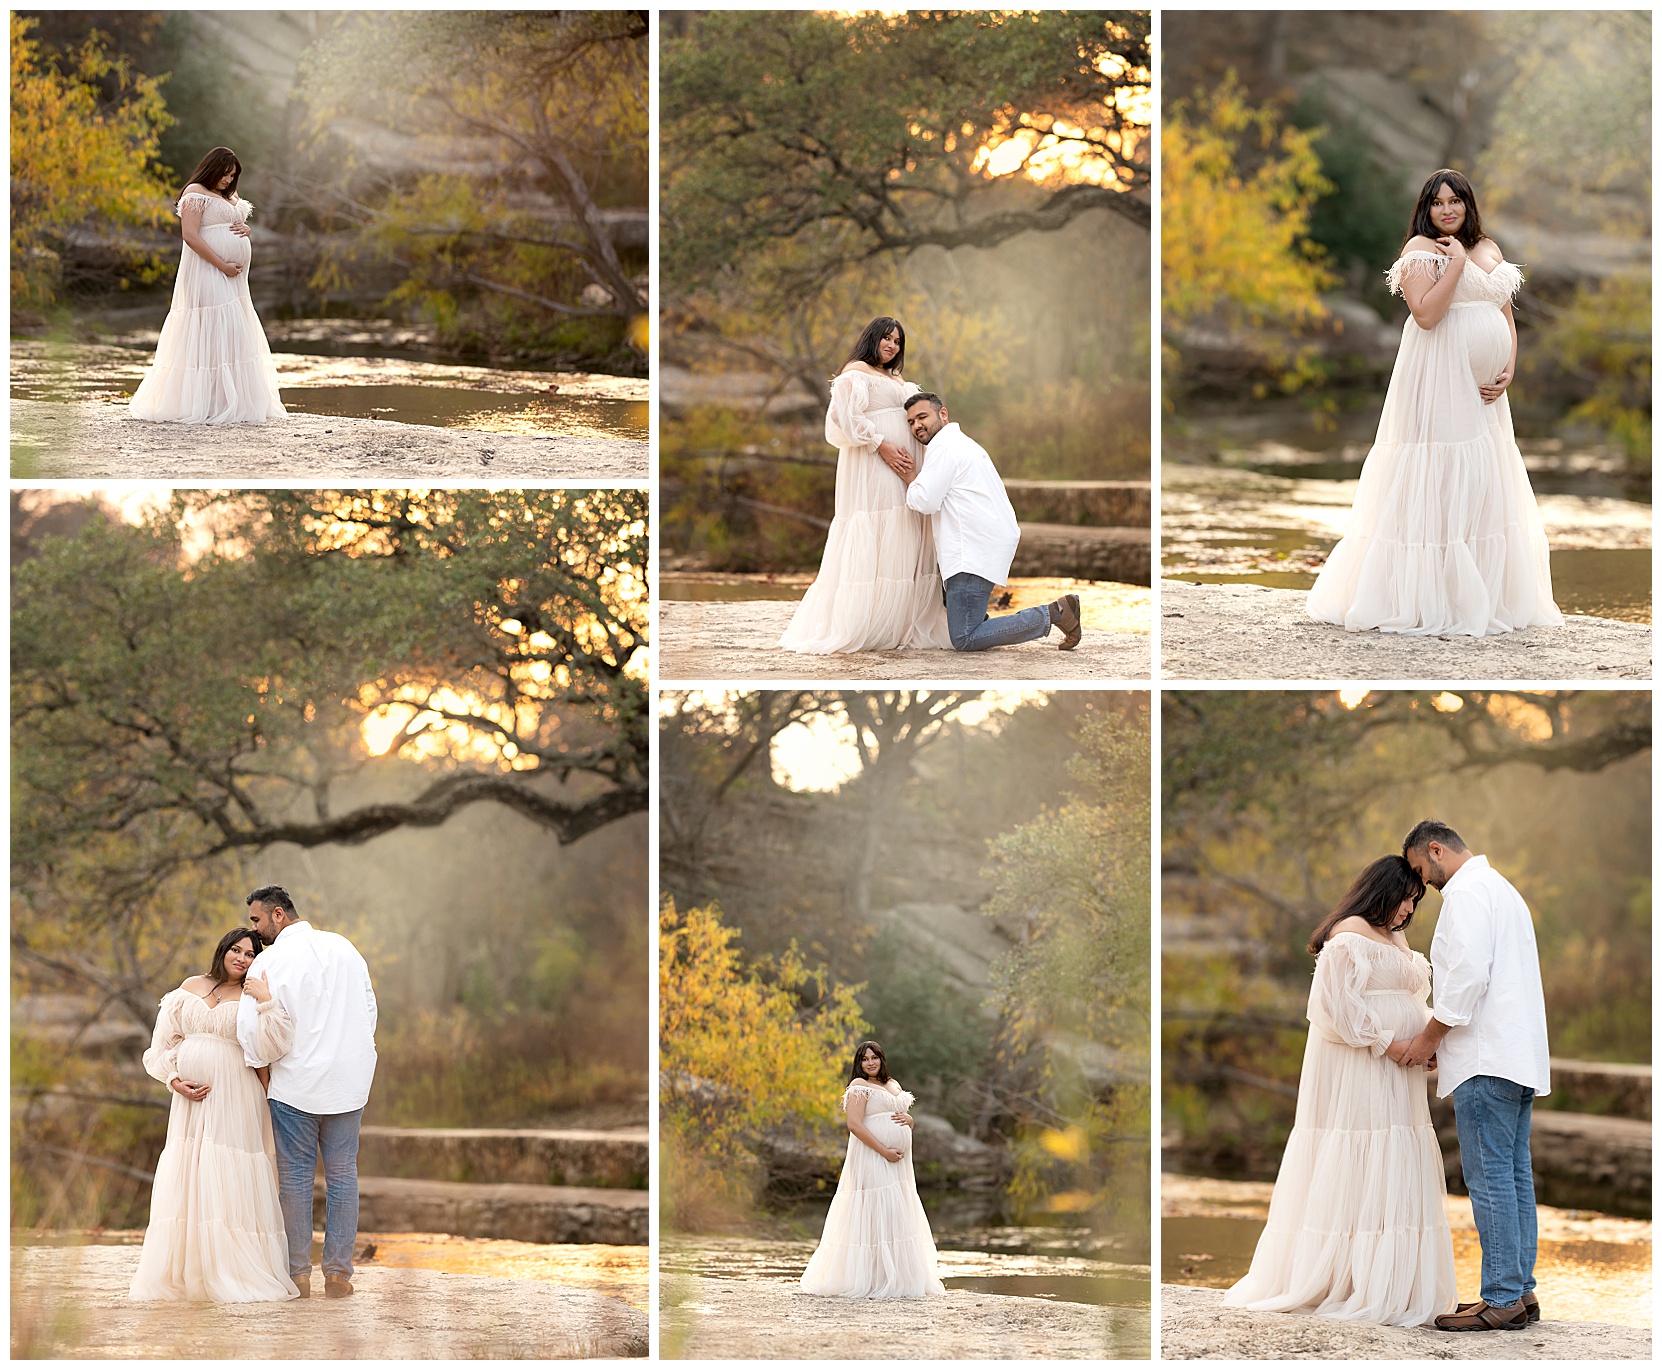 Photo montage featuring a man and woman. Woman is in a white maternity gown. All photos taken by Bull creek. Photos feature fall foliage and a sunset in the background.